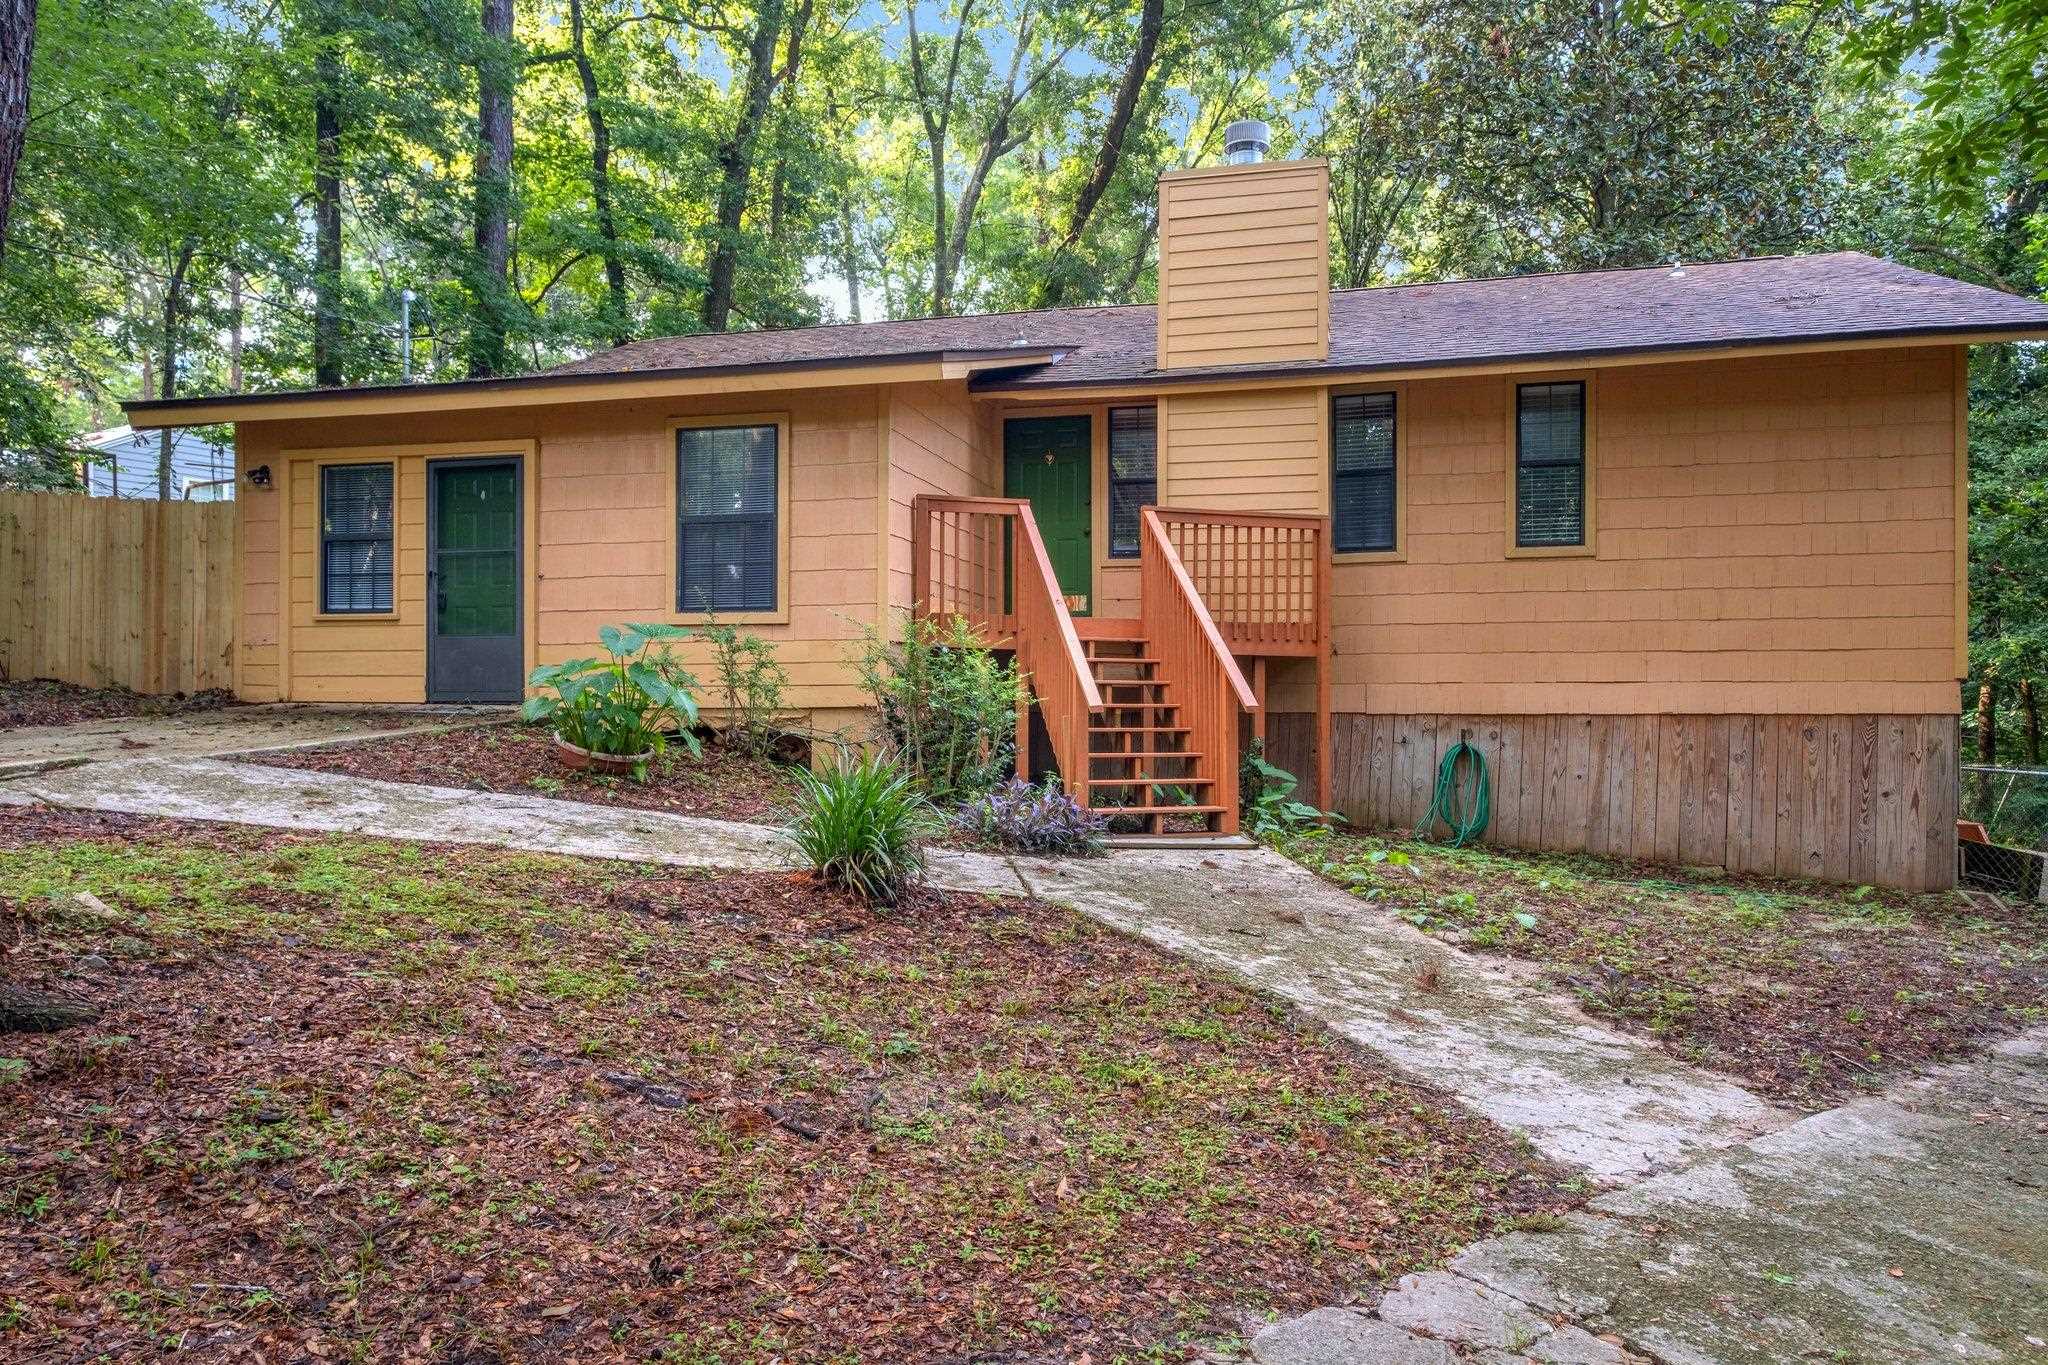 289 Fern Hollow Road,TALLAHASSEE,Florida 32312,4 Bedrooms Bedrooms,2 BathroomsBathrooms,Detached single family,289 Fern Hollow Road,369750